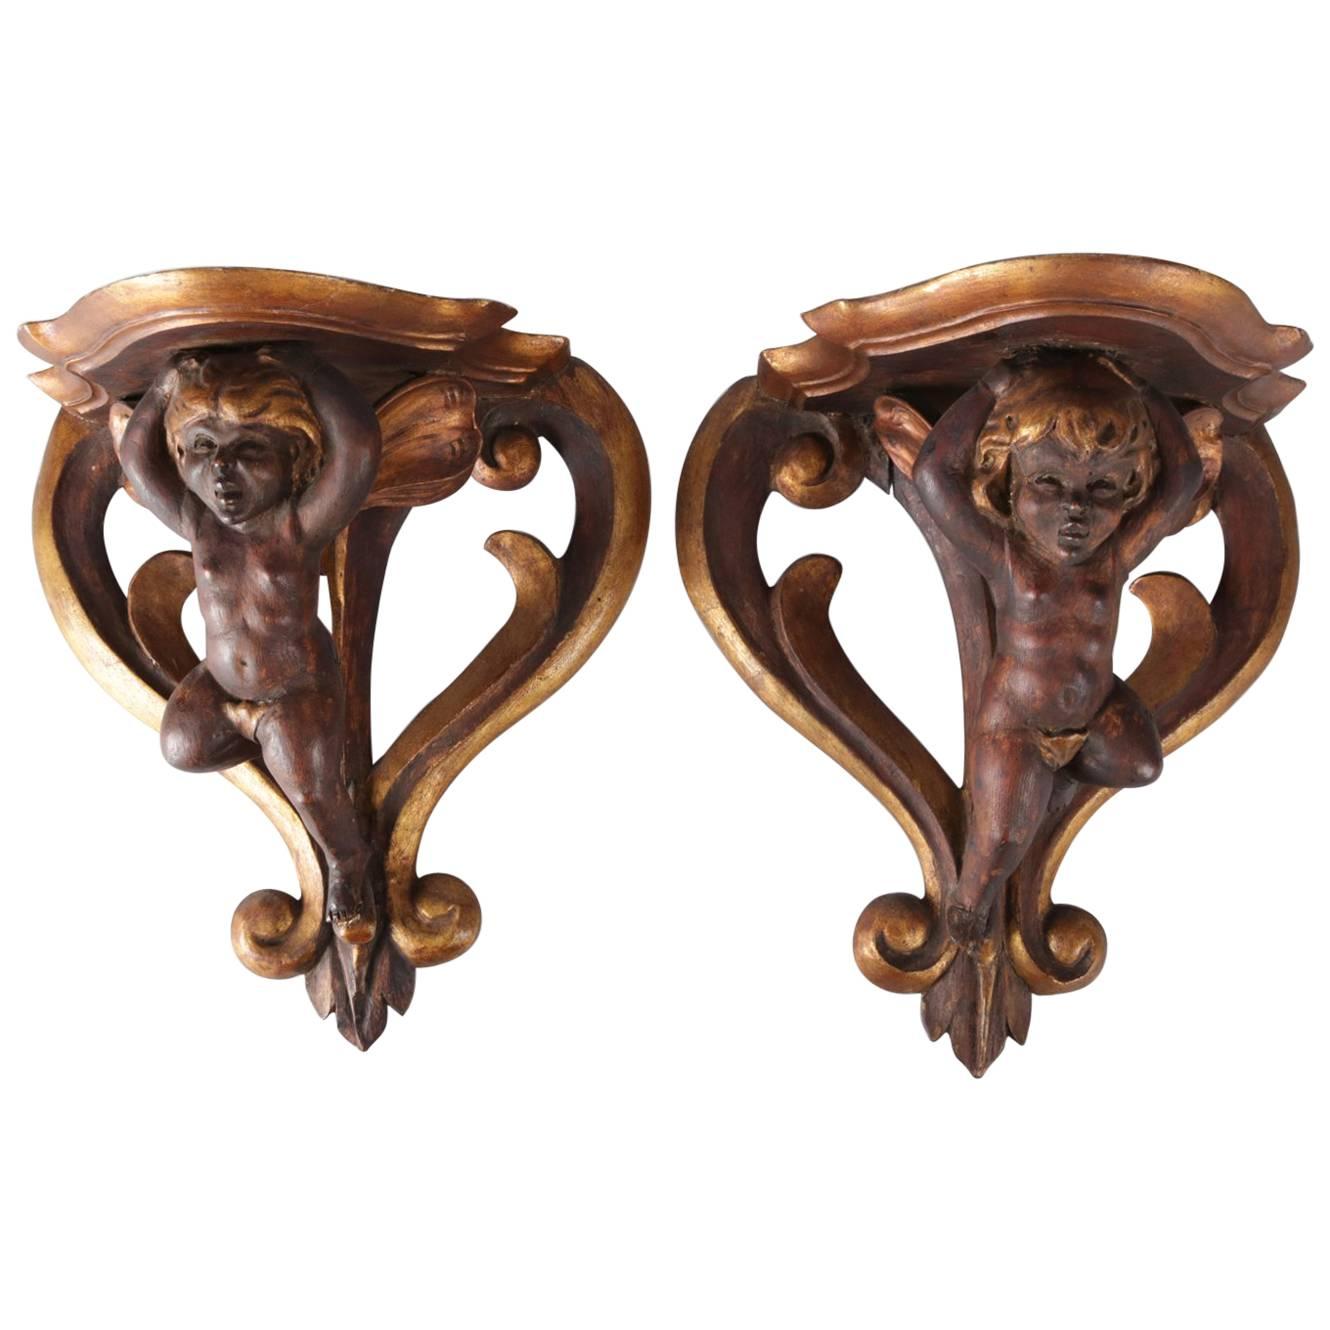 Pair of Antique Italian Baroque Cherub Painted and Gilt Gesso on Wood Sconces